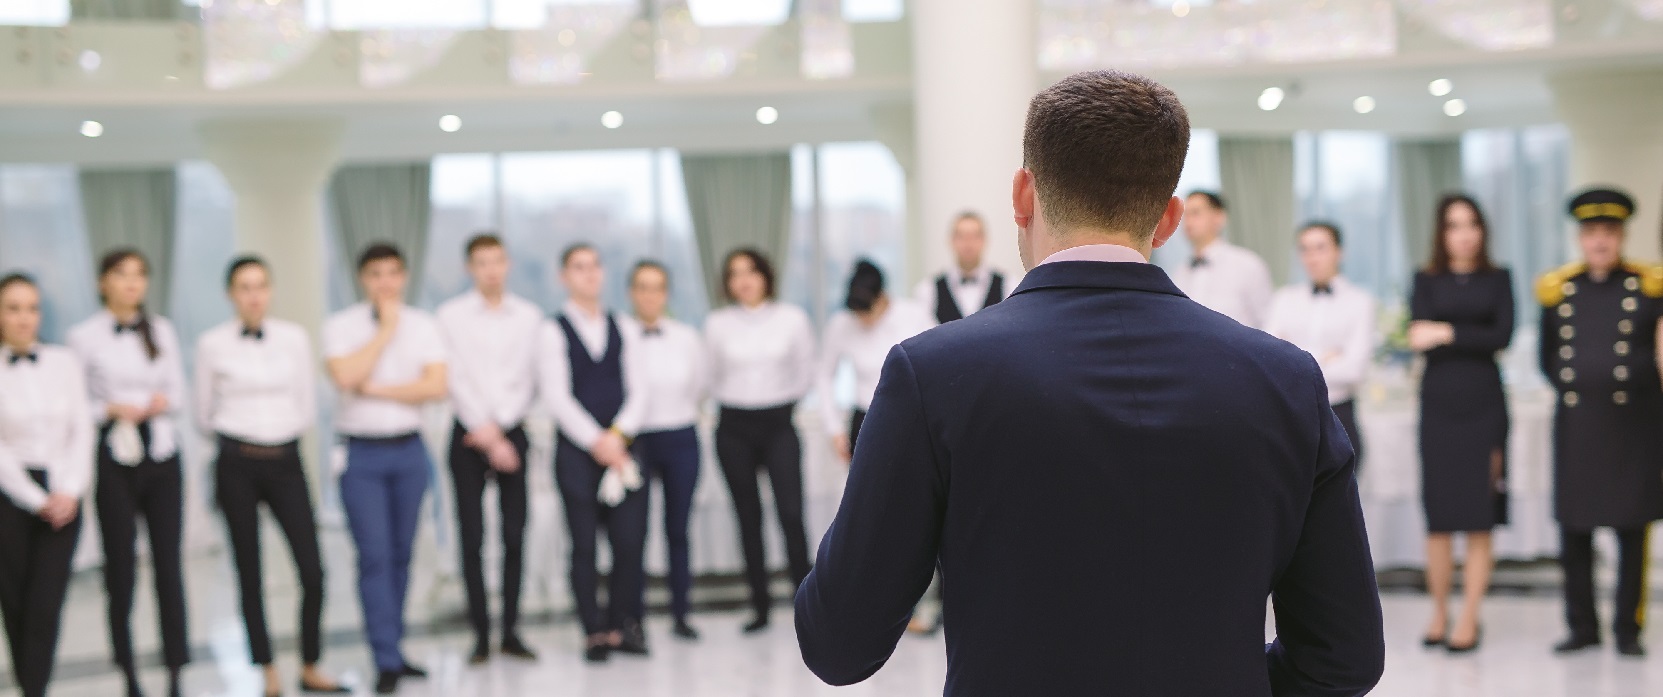 An image of a manager heading a team briefing full of hotel and restaurant staff members. This image is being used as the cover image for the CTH Gold Employers page.